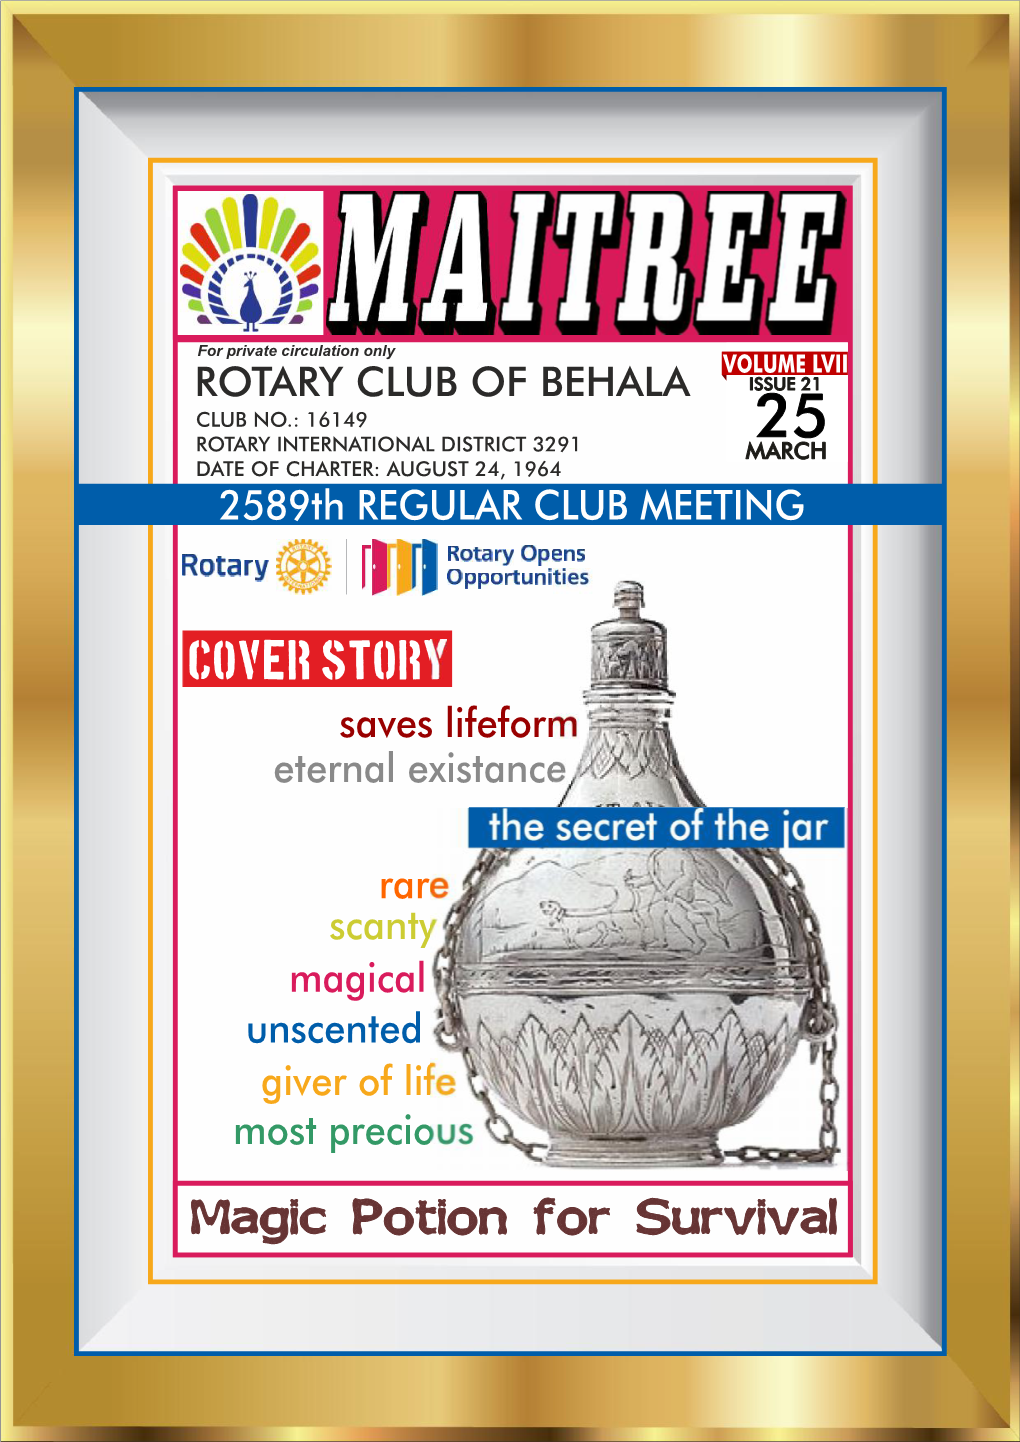 COVER STORY Saves Lifeform Eternal Existance the Secret of the Jar Rare Scanty Magical Unscented Giver of Life Most Precious ROTARY CLUB of BEHALA I RID 3291